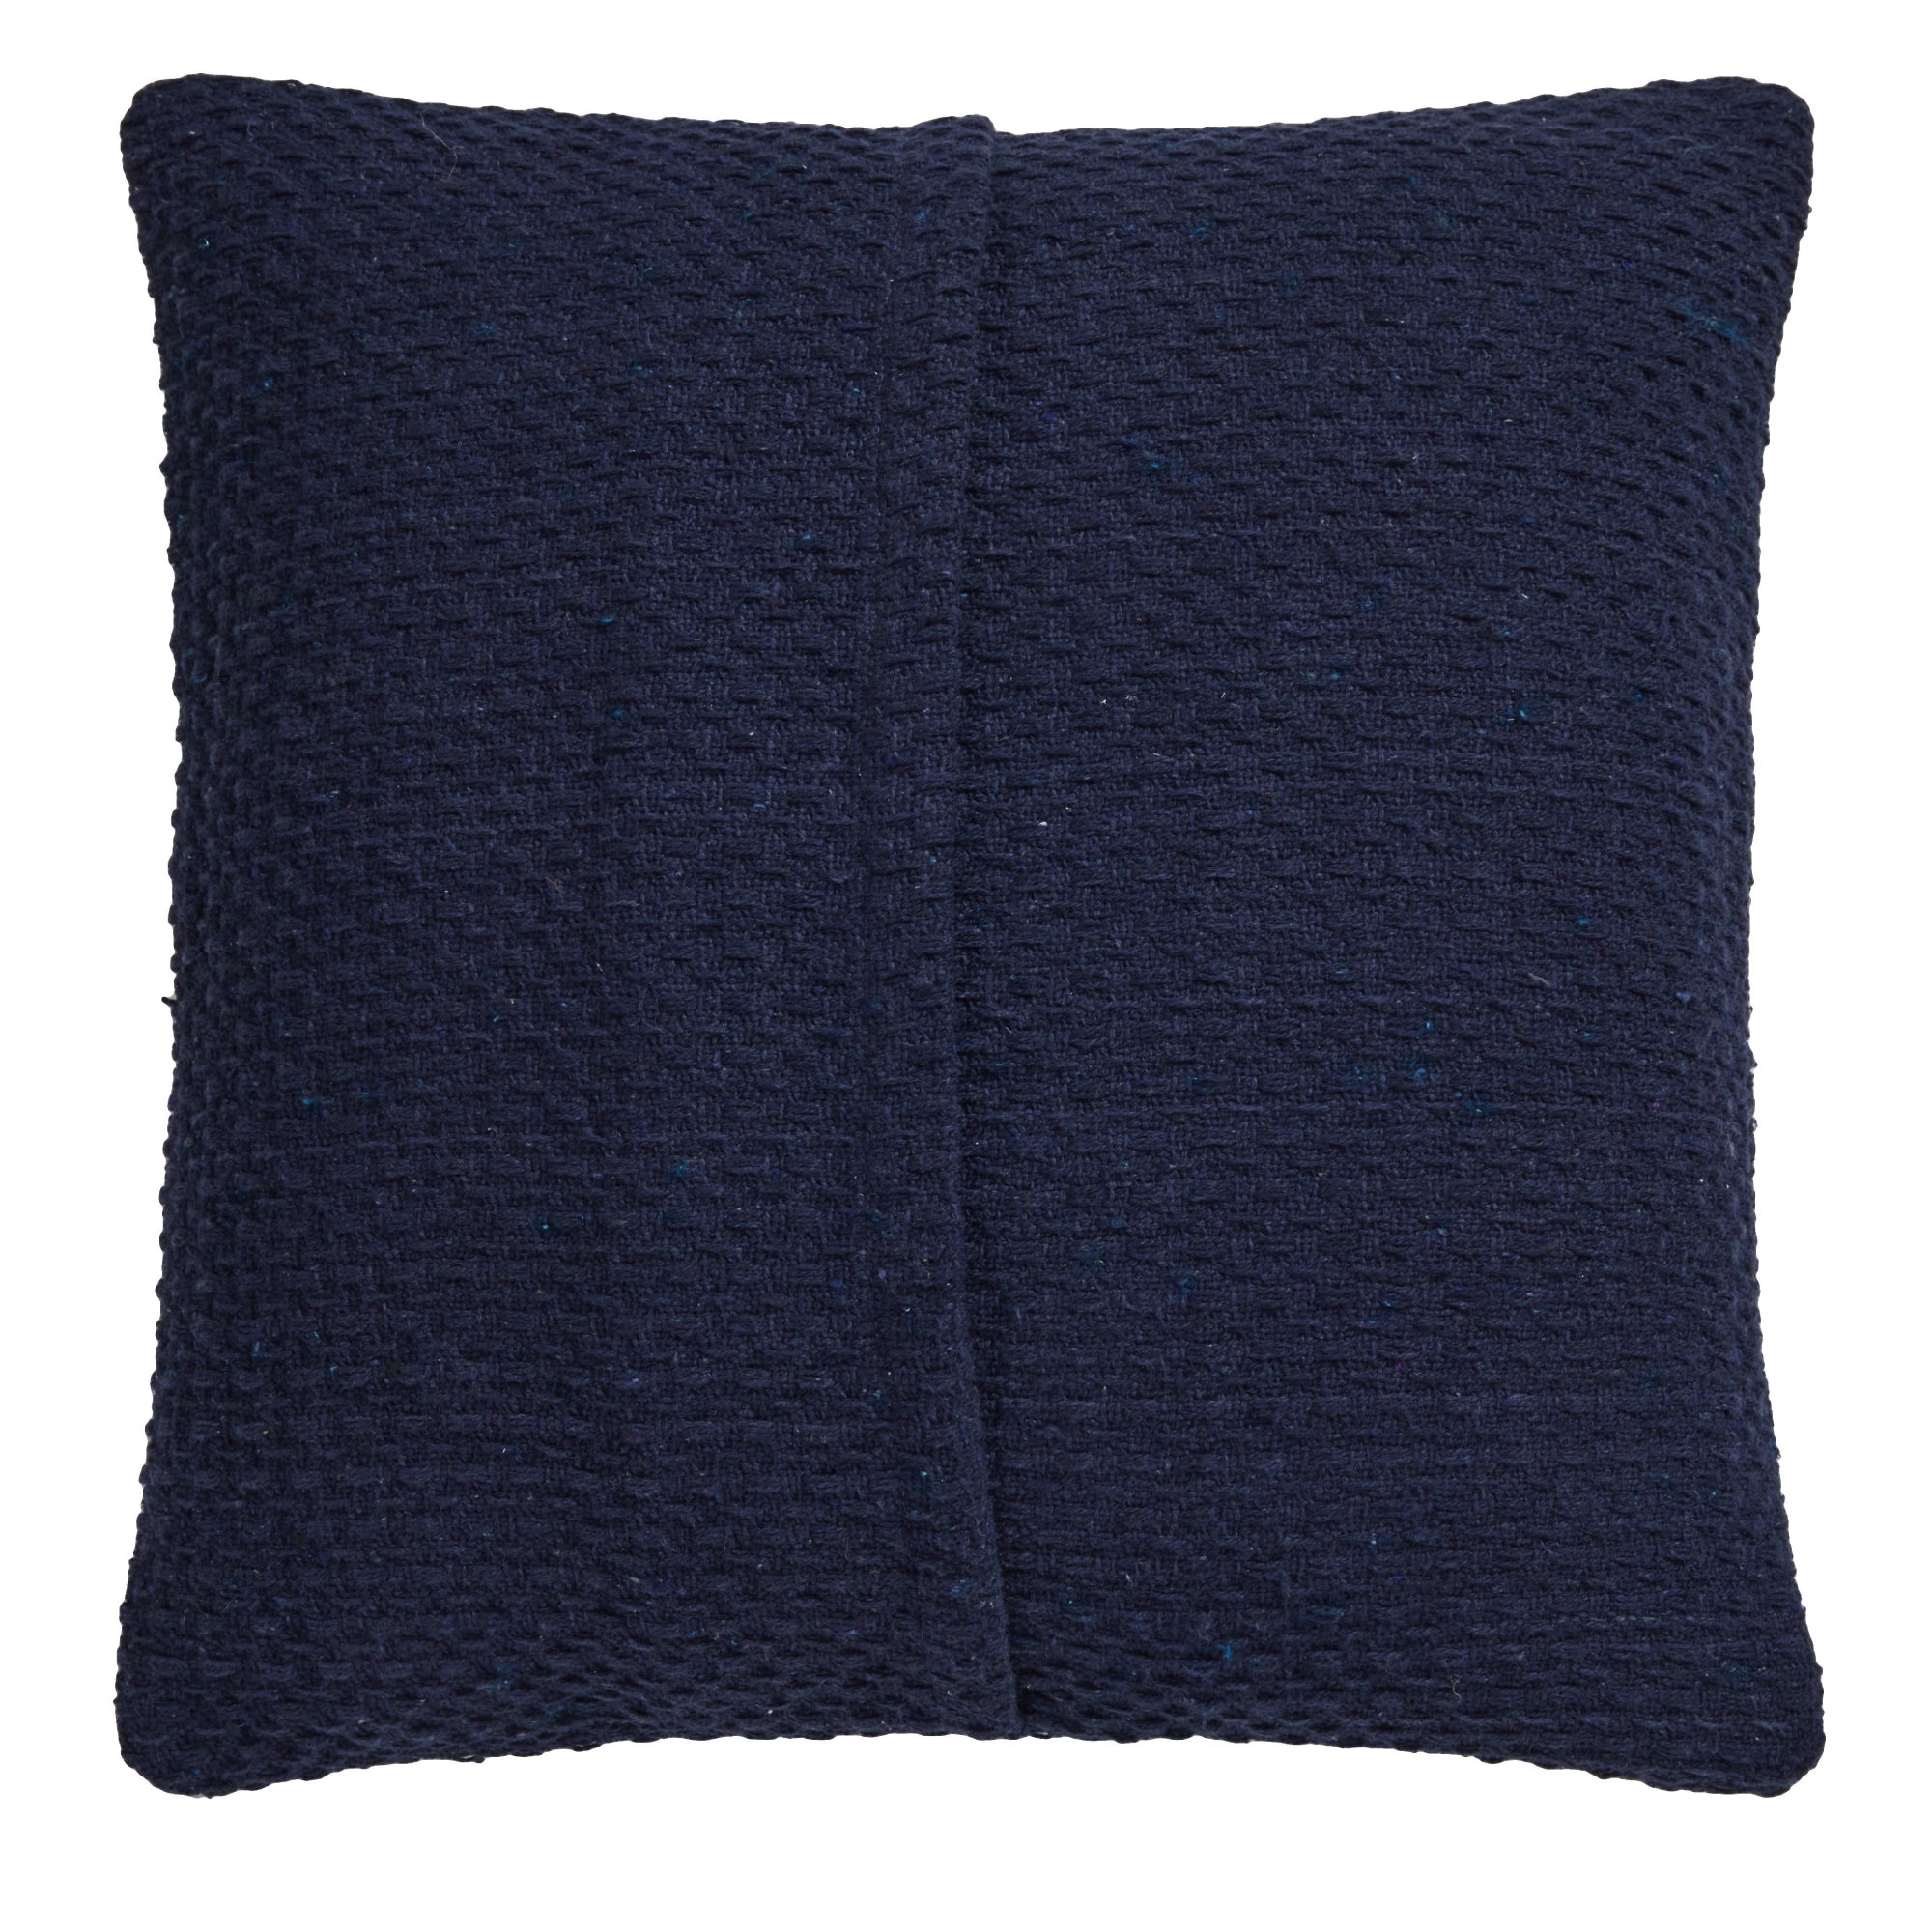 Filled Cushion Hayden by Drift Home in Navy